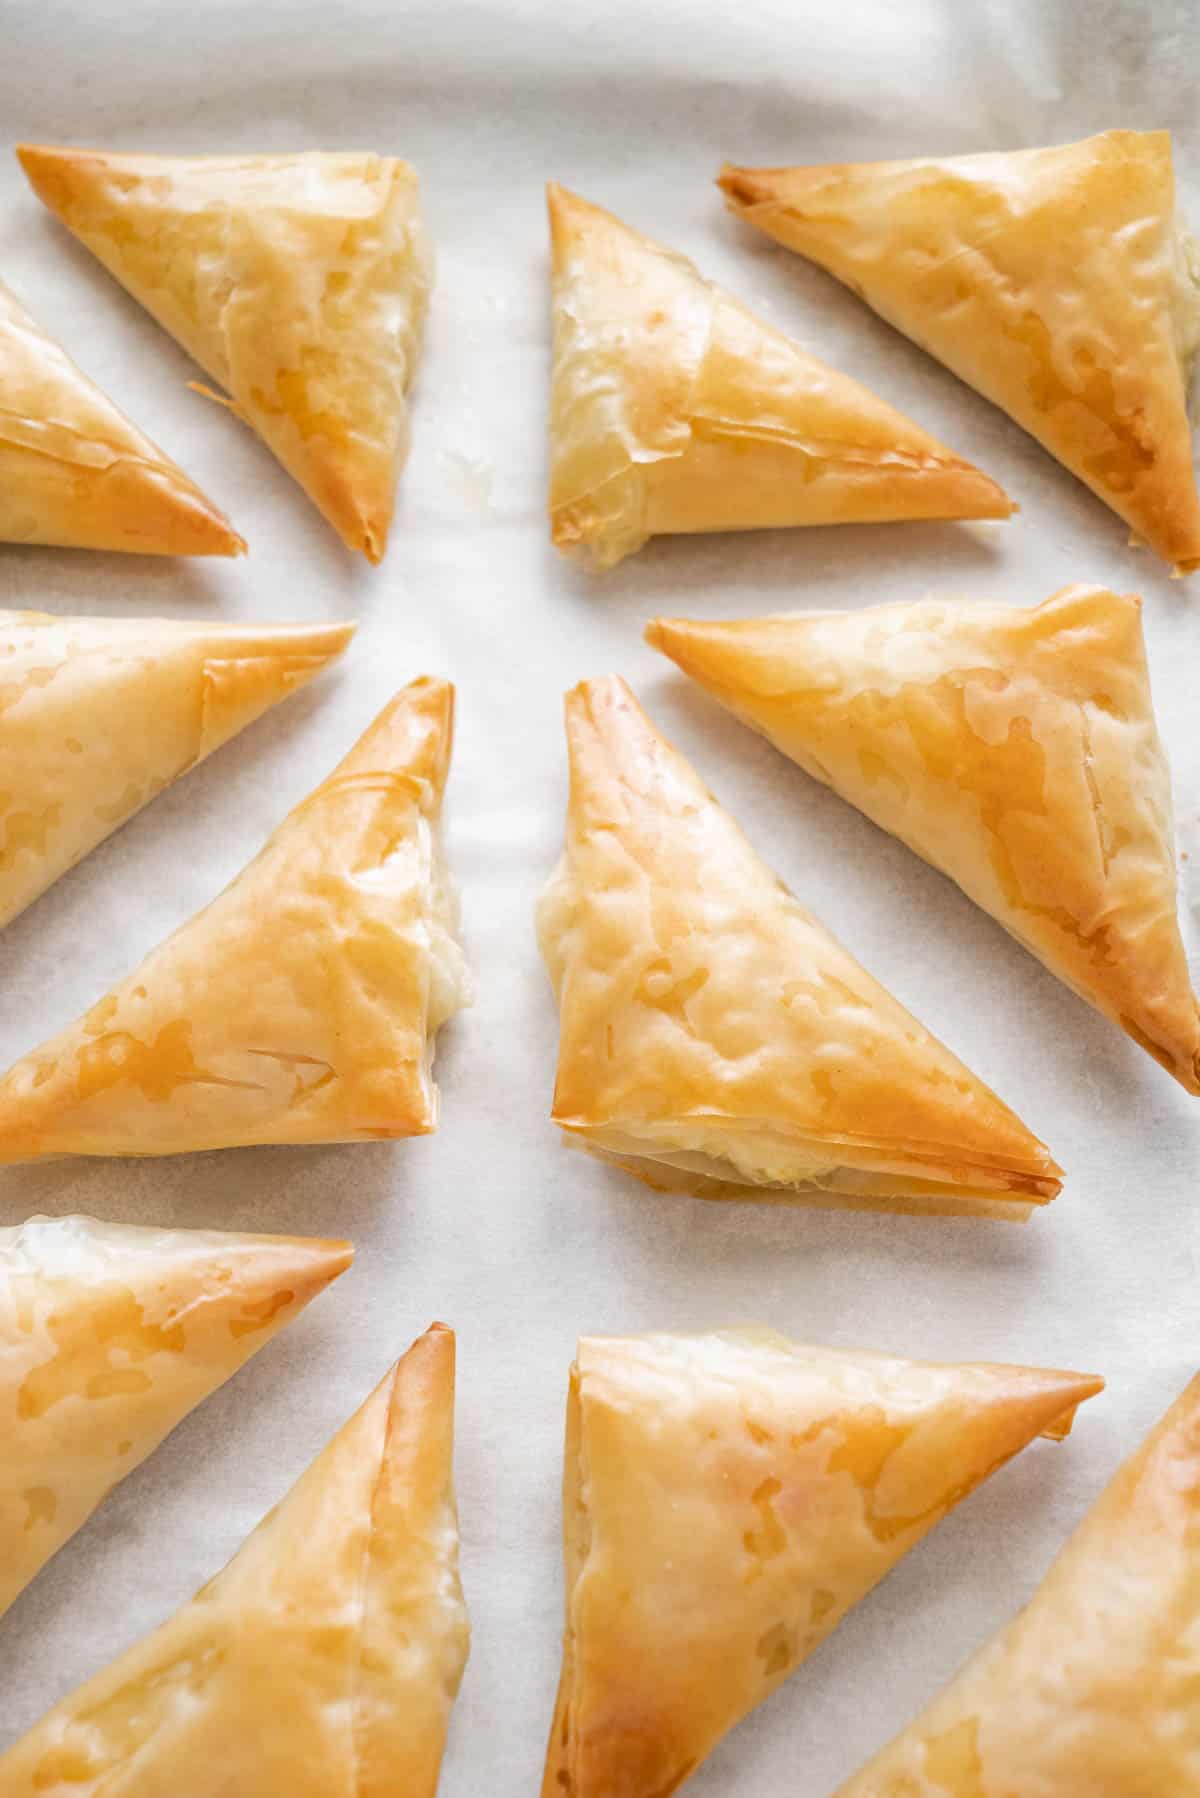 several baked, triangle-shaped tiropitakia feta hand pies on parchment paper.